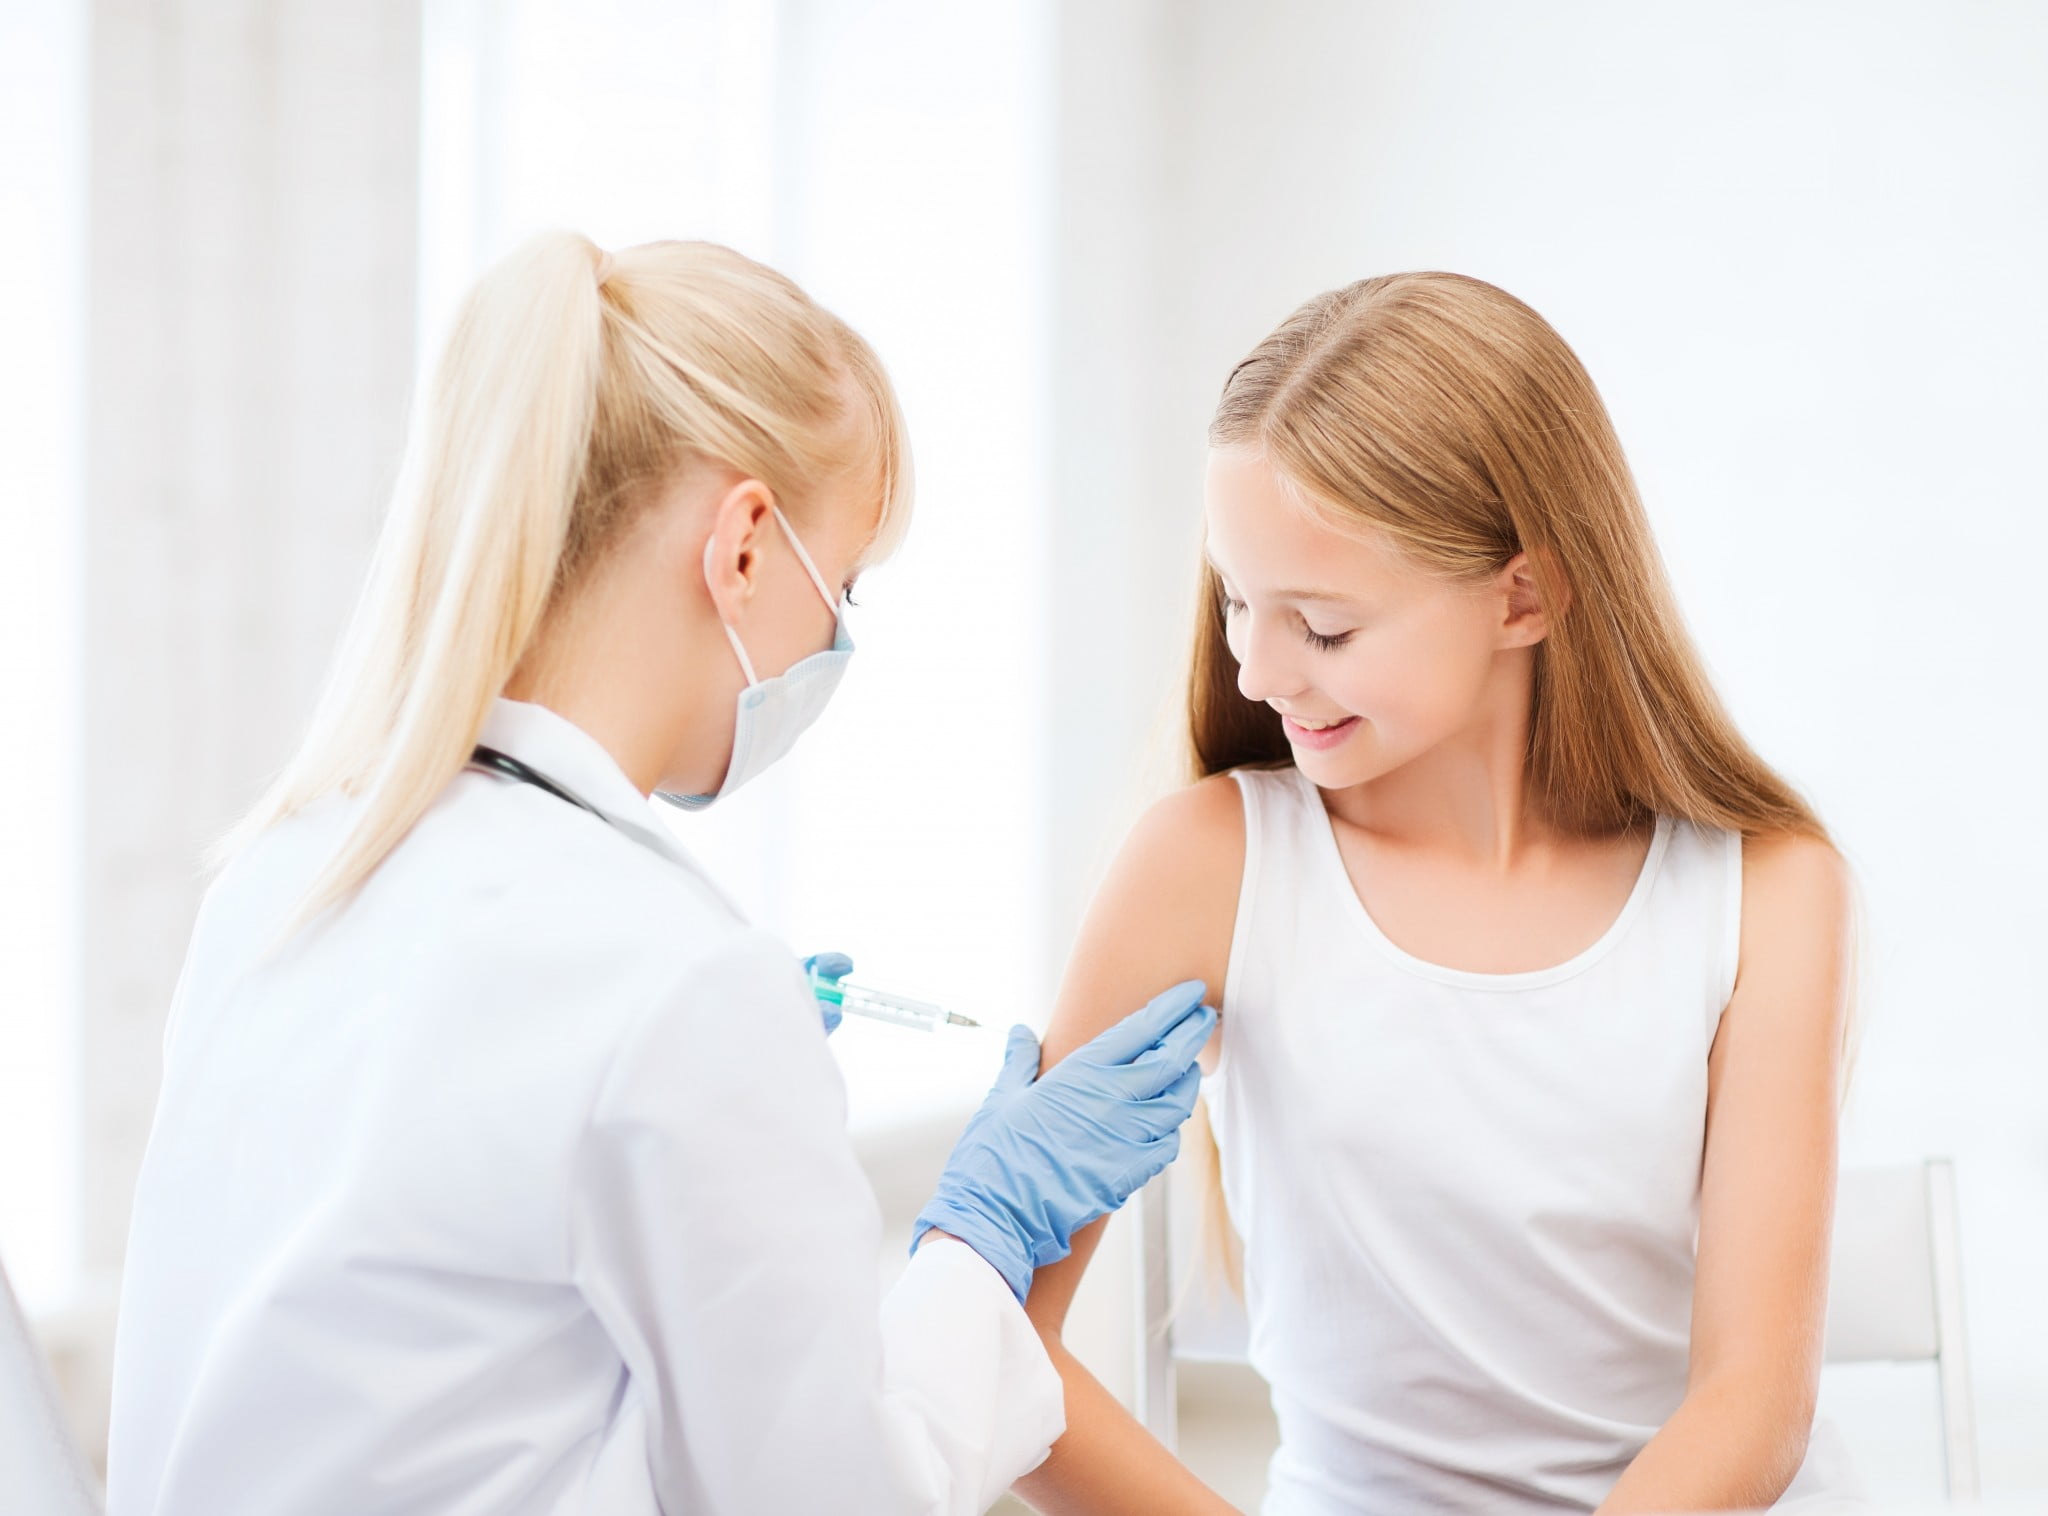 teenage girl getting vaccine, possible HPV vaccine